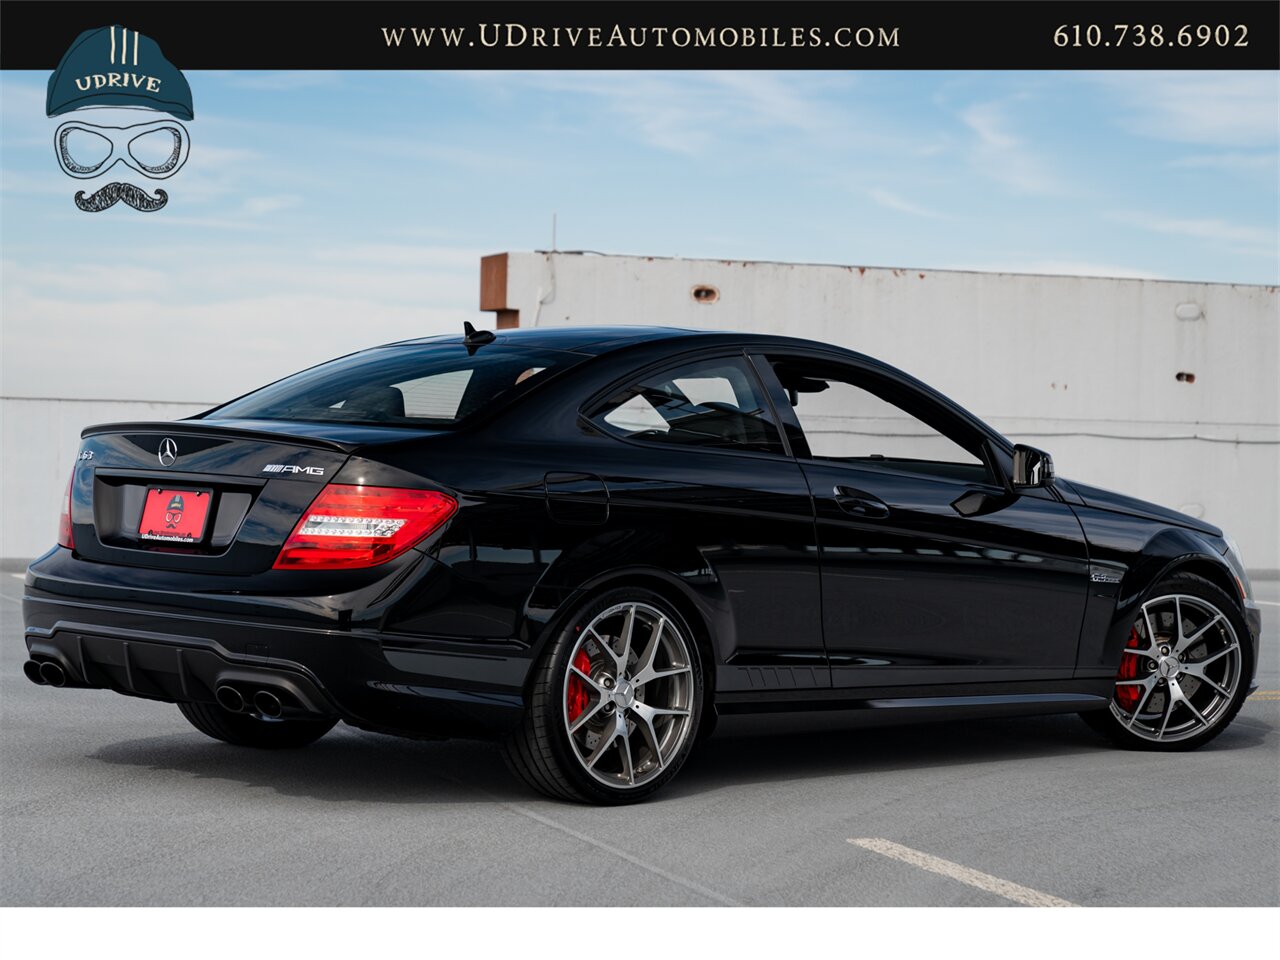 2015 Mercedes-Benz C63 AMG  Edition 507 17k Miles Pano Sunroof Locking Diff 507hp - Photo 2 - West Chester, PA 19382